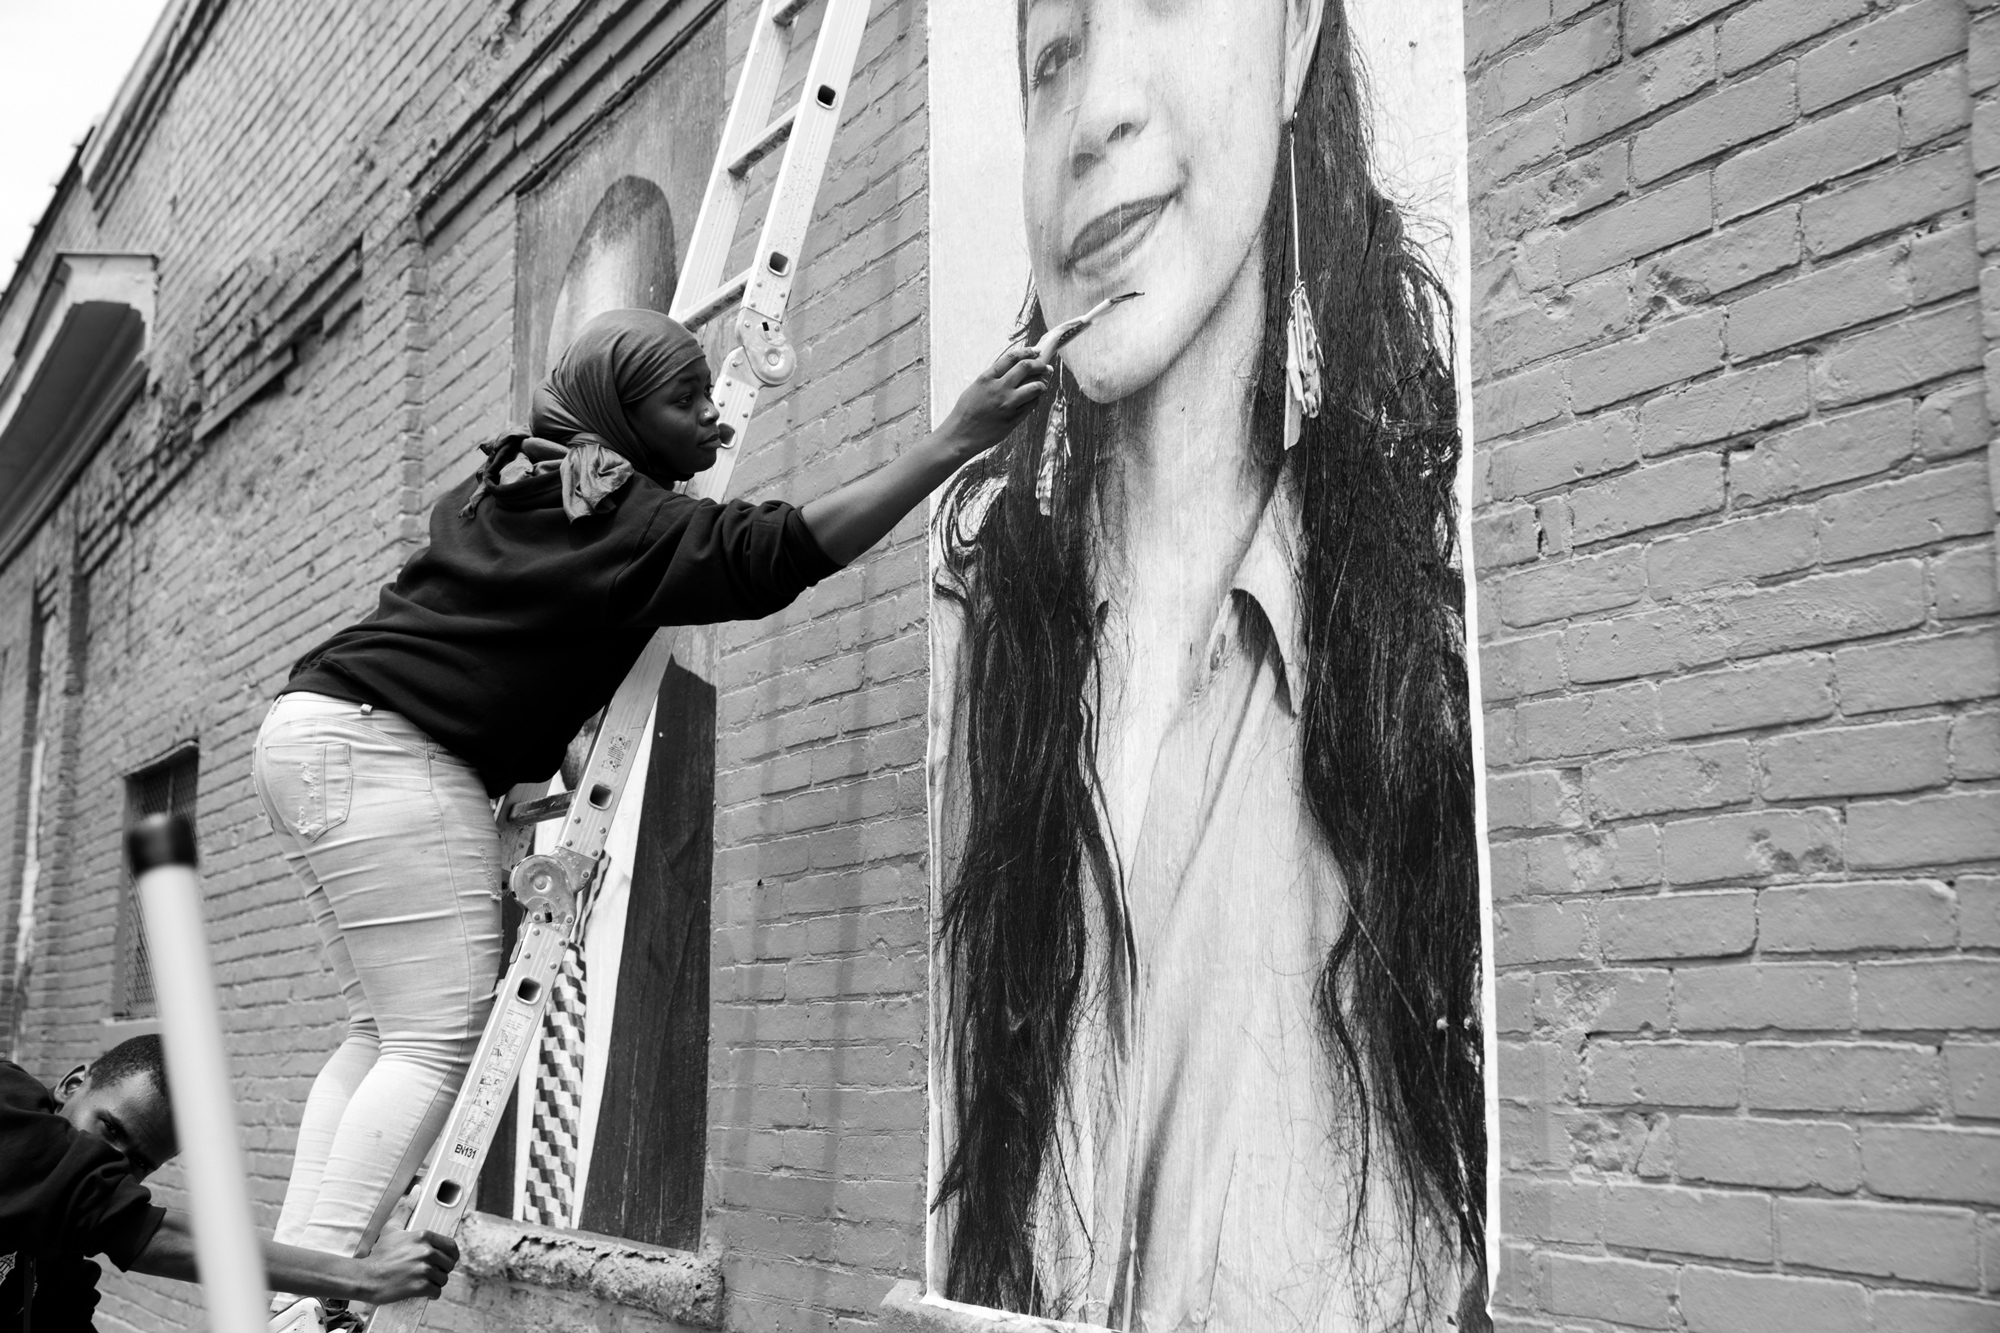 woman on a ladder that a man is stabilizing while she is putting the final touches on the person's portrait hanging on the side of a brick building